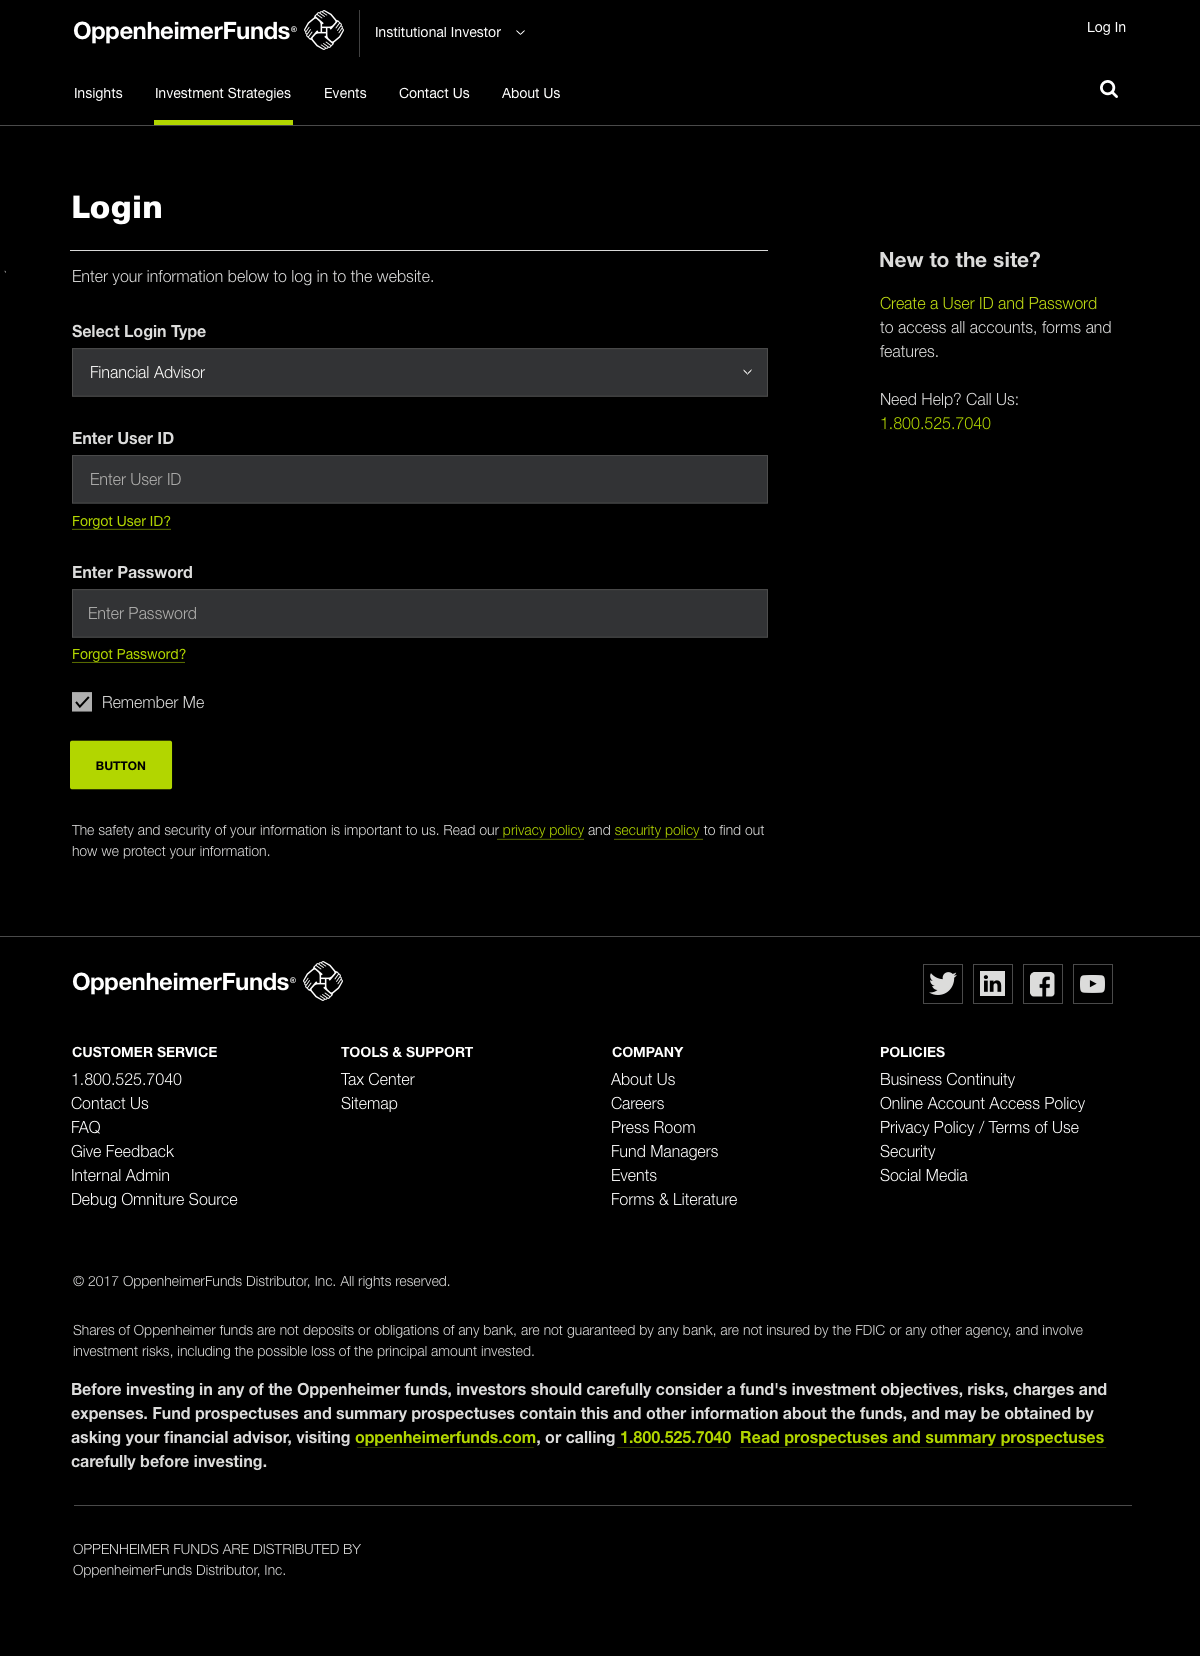 High fidelity page design featuring a form with a dark color theme